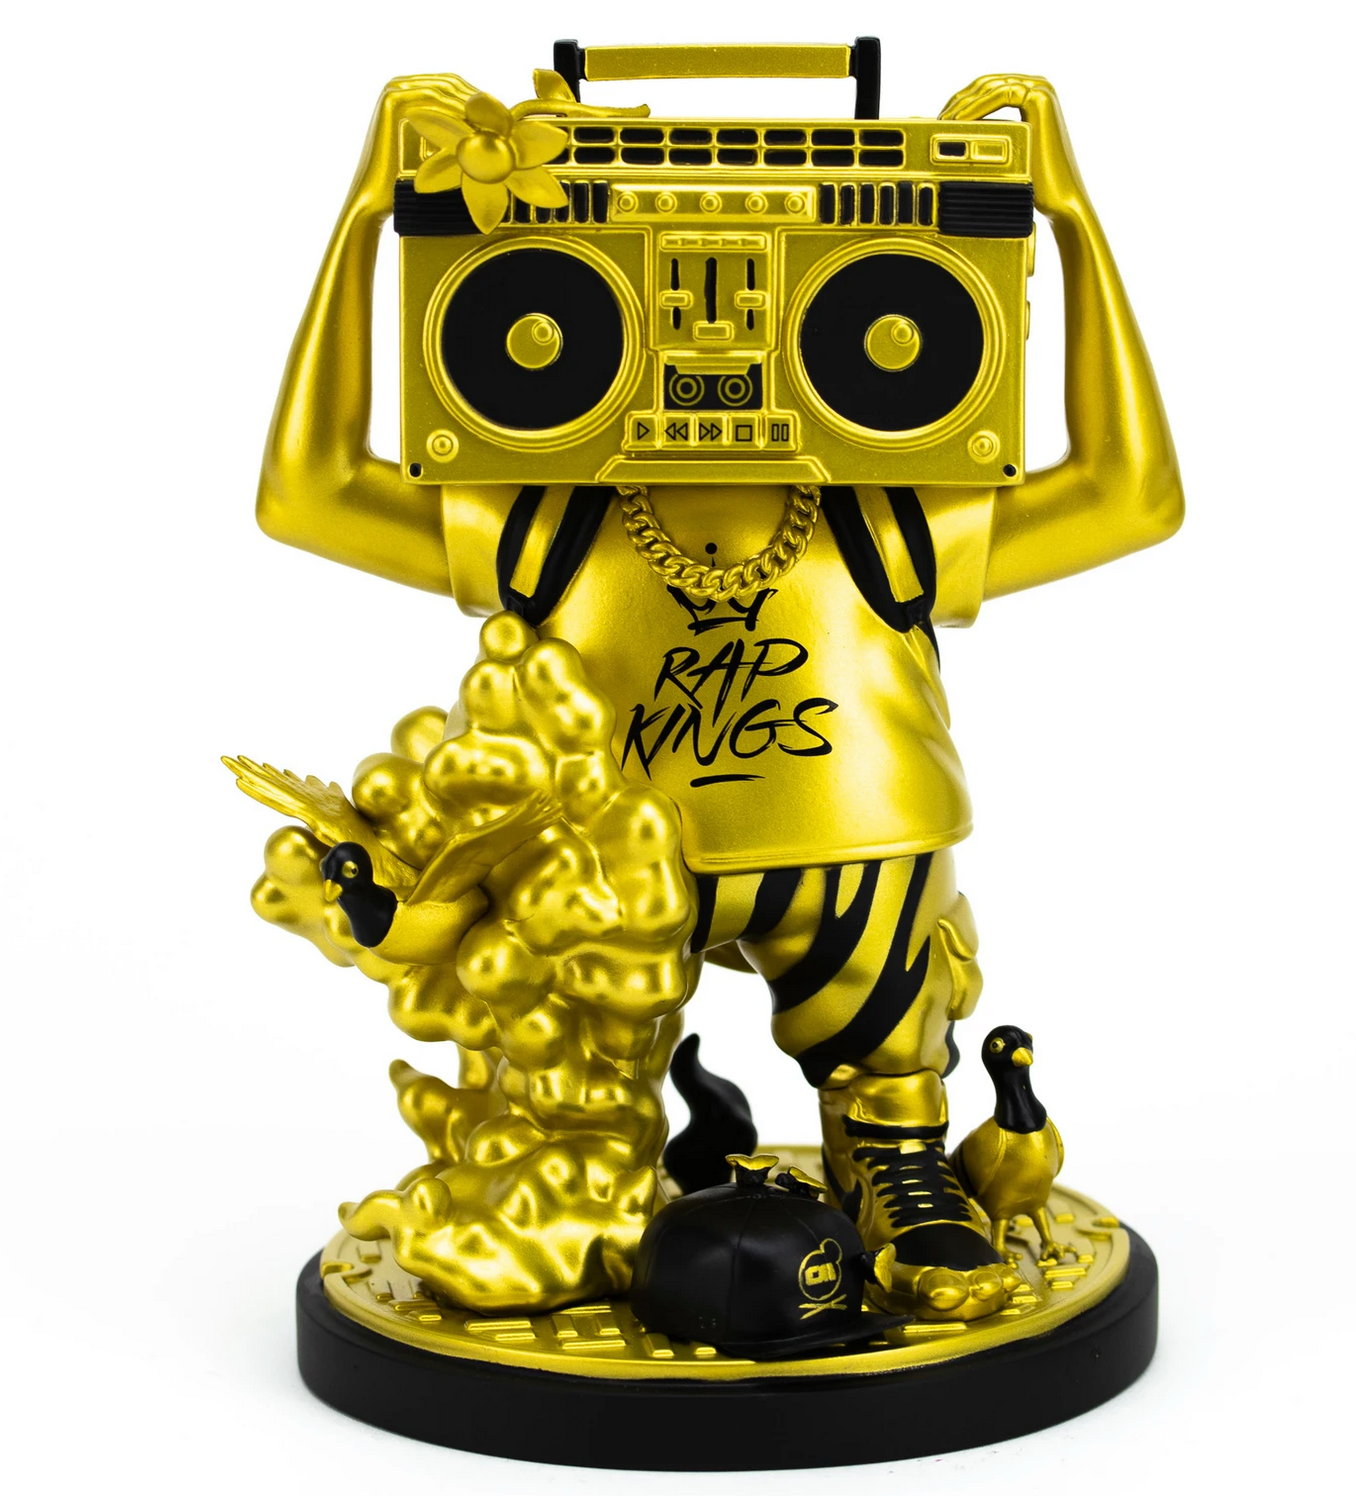 Rap Kings GOONBOX Gold Edition 7 inch vinyl figure by Chris Murray x Clutter Available Now ! ! !